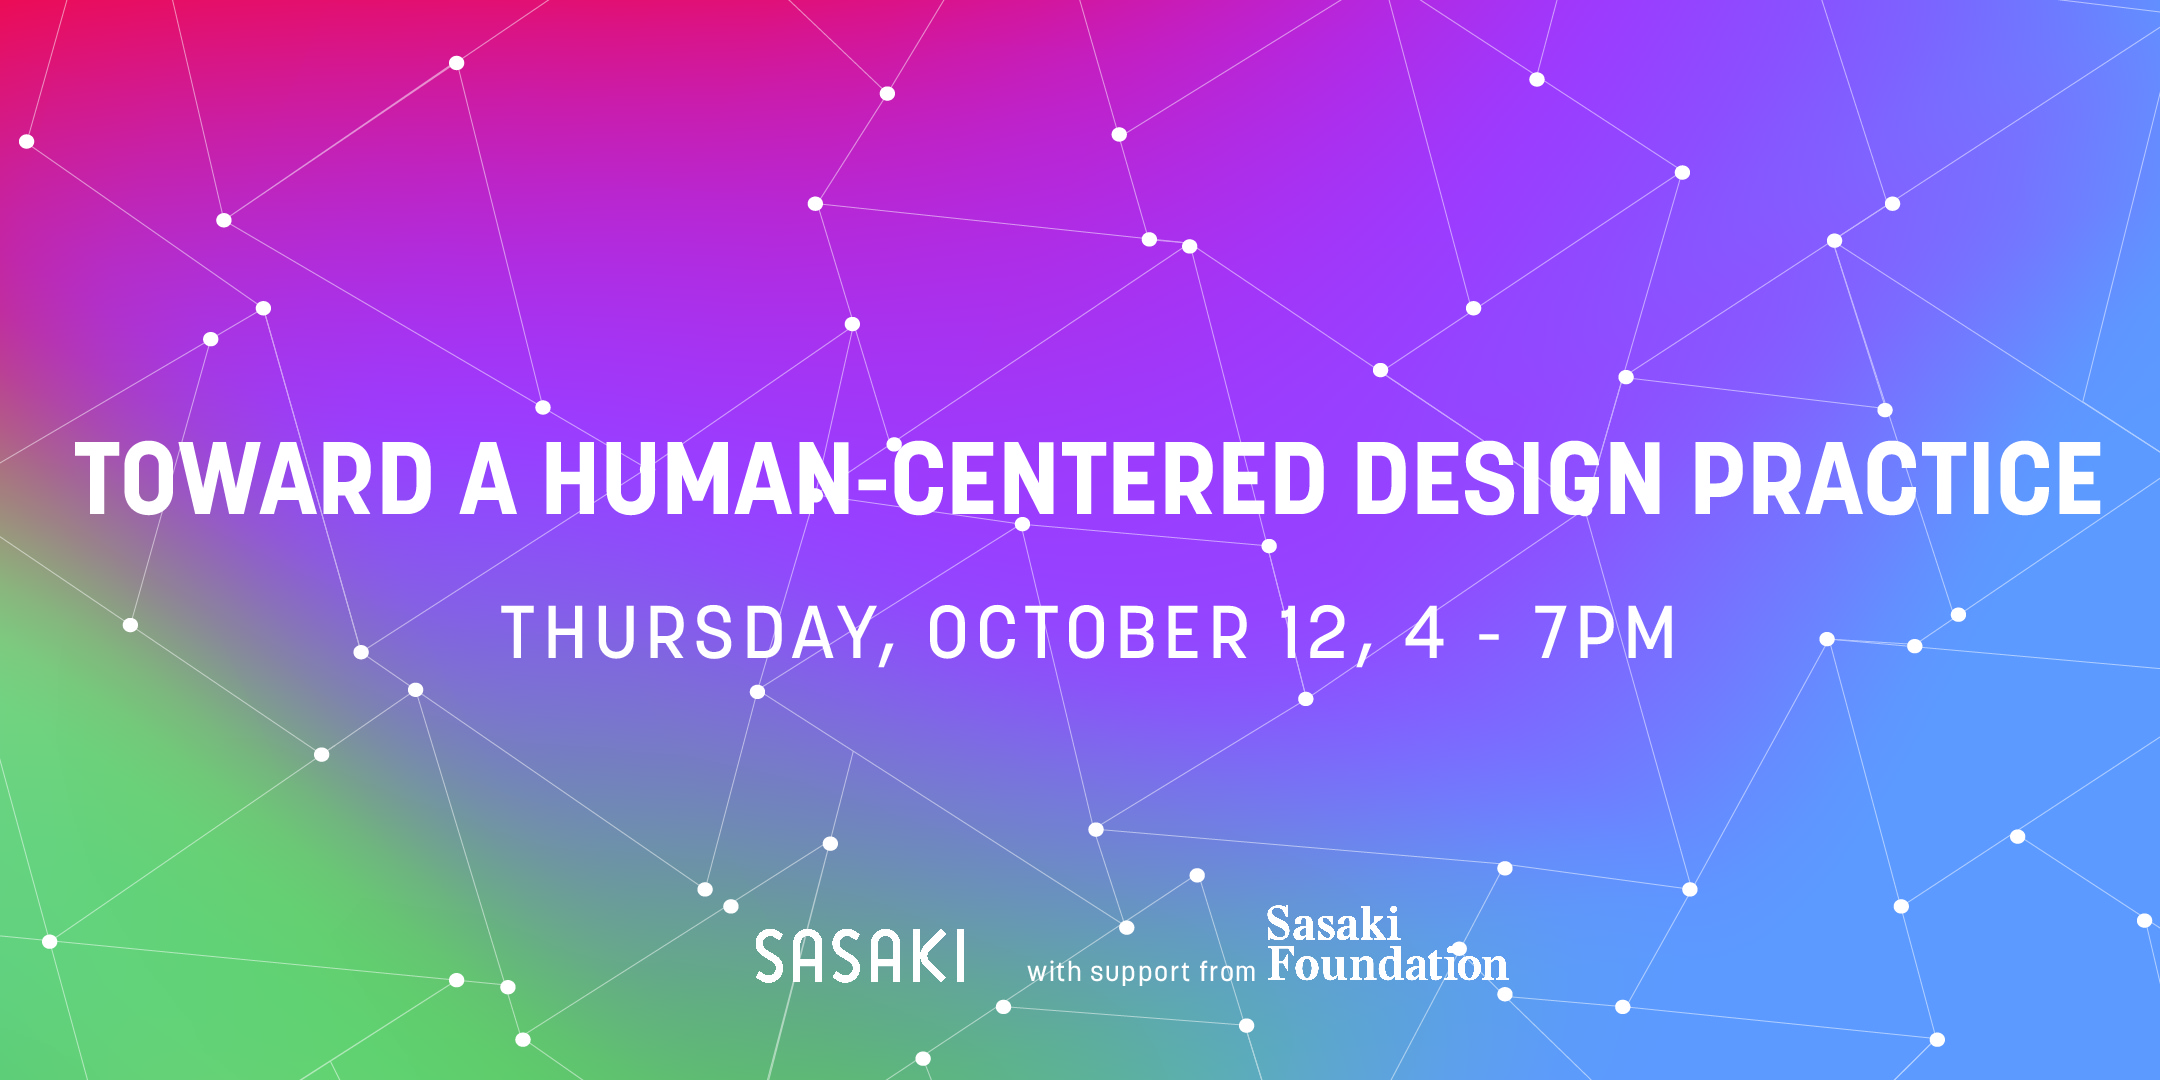 Colorful background with event text: Toward a Human-centered Design Practice, Thursday, October 12, 4-7pm, hosted by Sasaki with support from the Sasaki Foundation